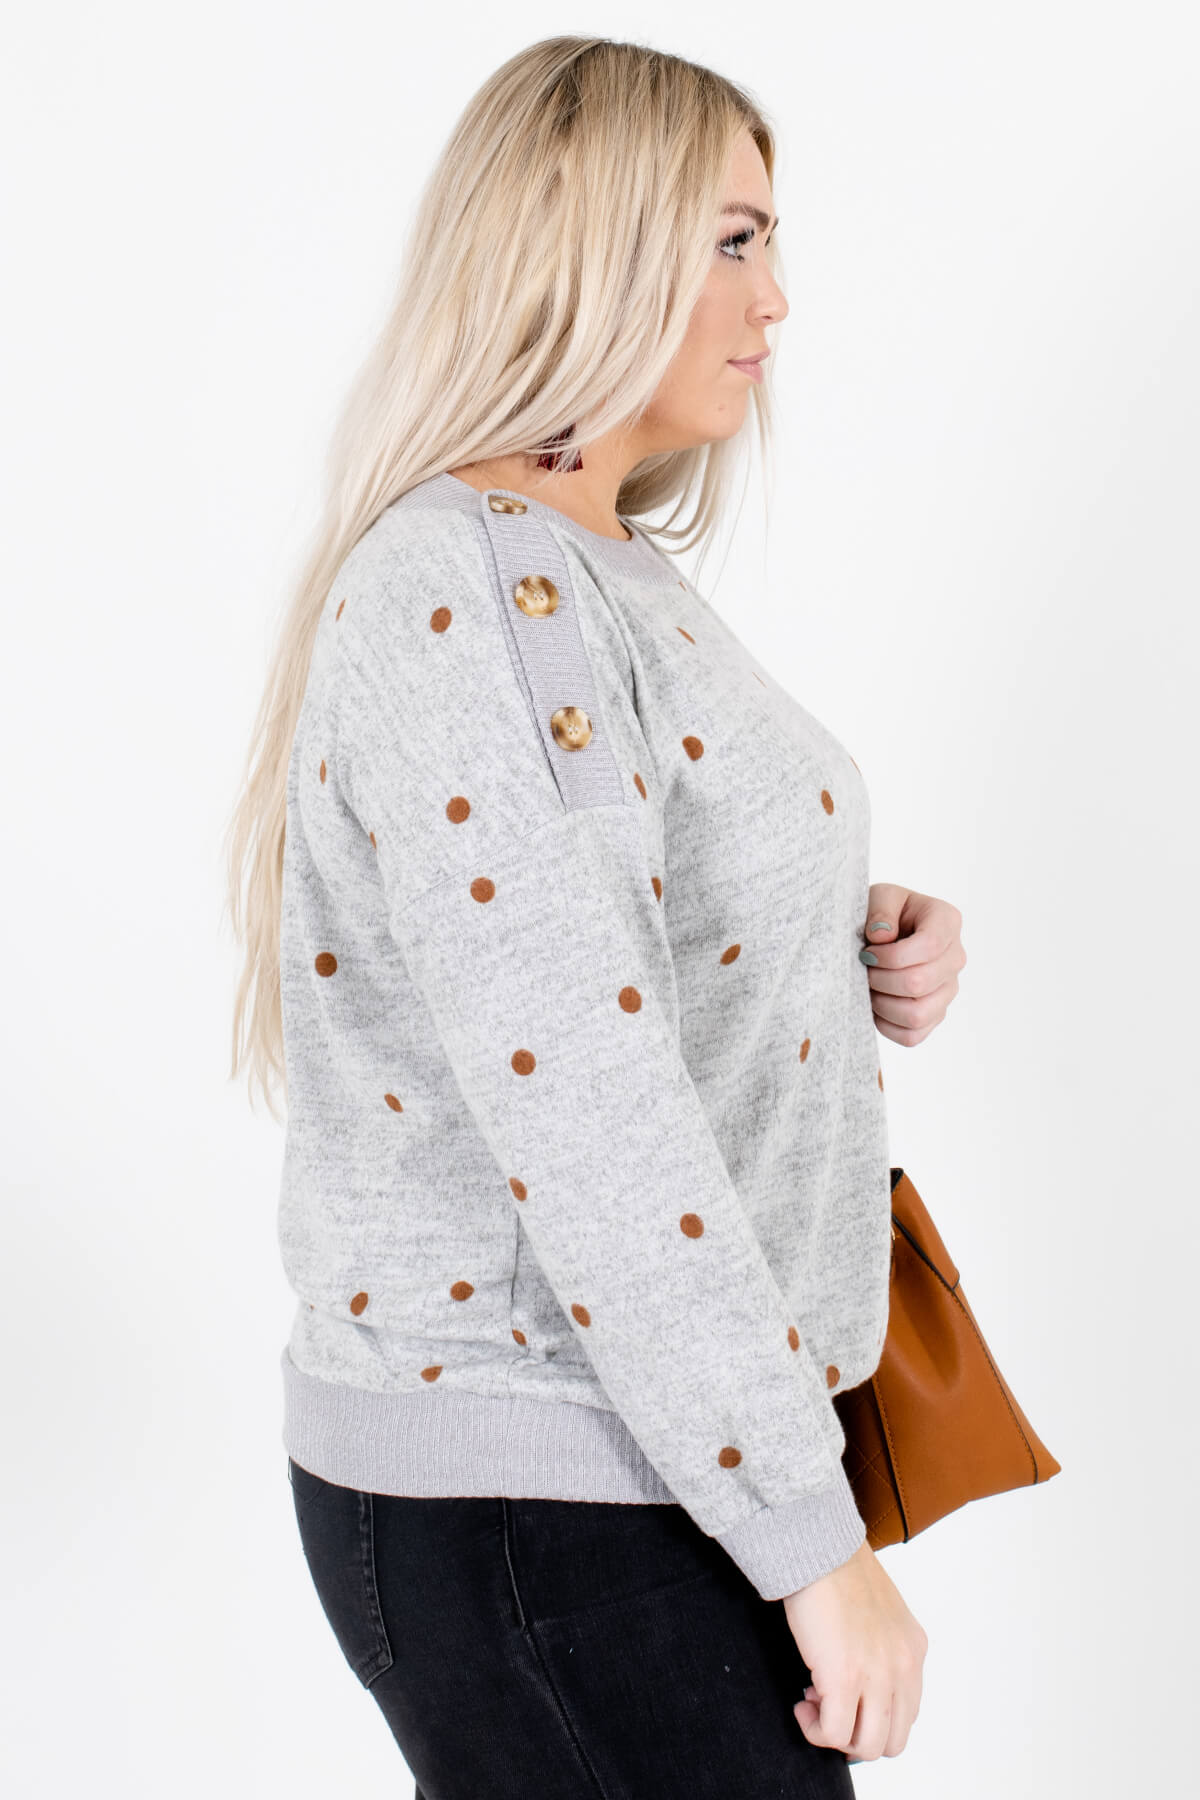 Heather Gray Long Sleeve Boutique Sweaters for Women